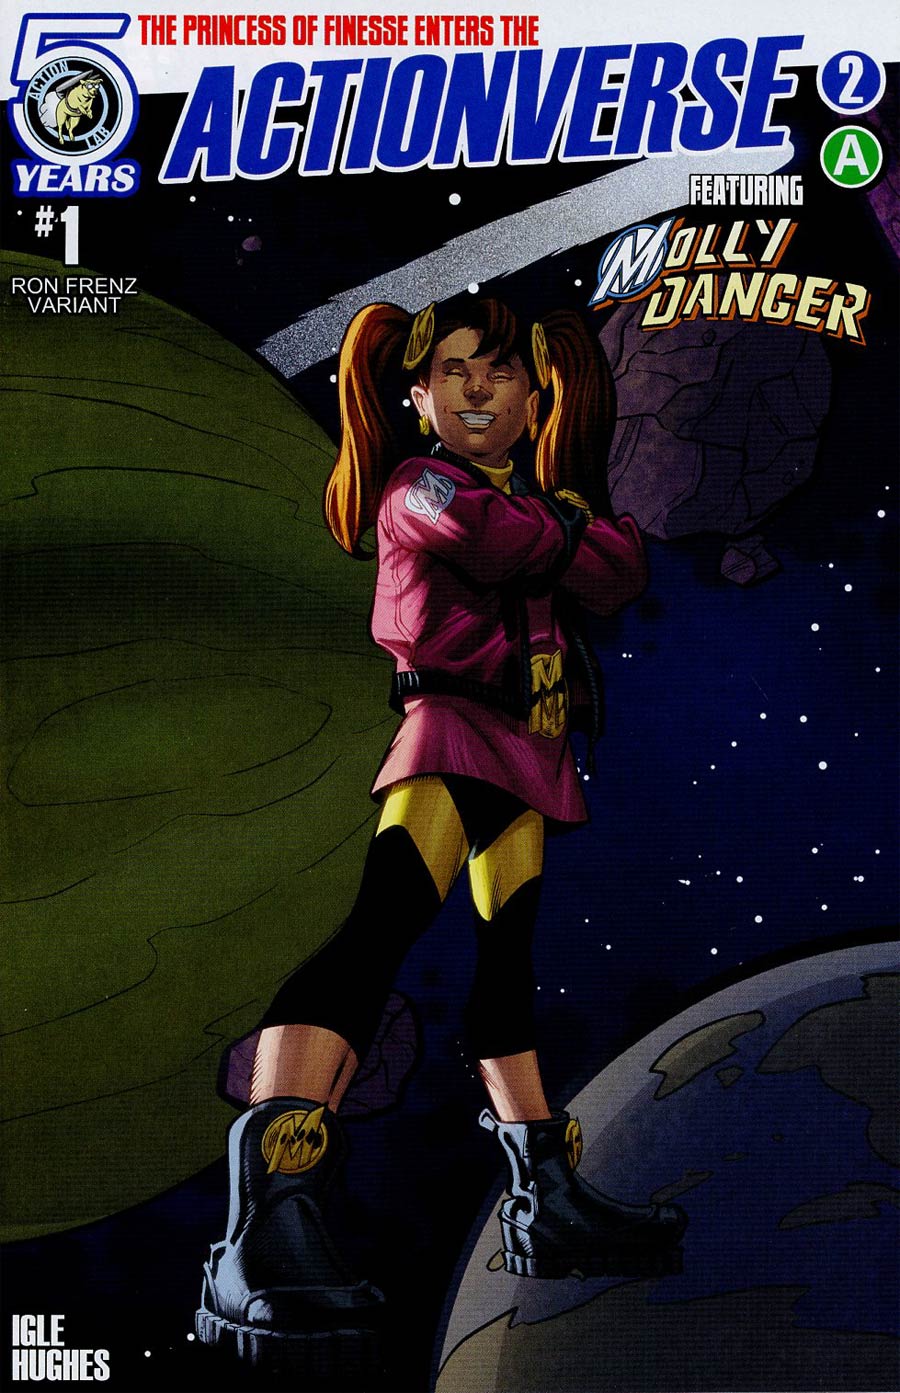 Actionverse #2 Featuring Molly Danger Cover B Variant Ron Frenz Connecting Cover